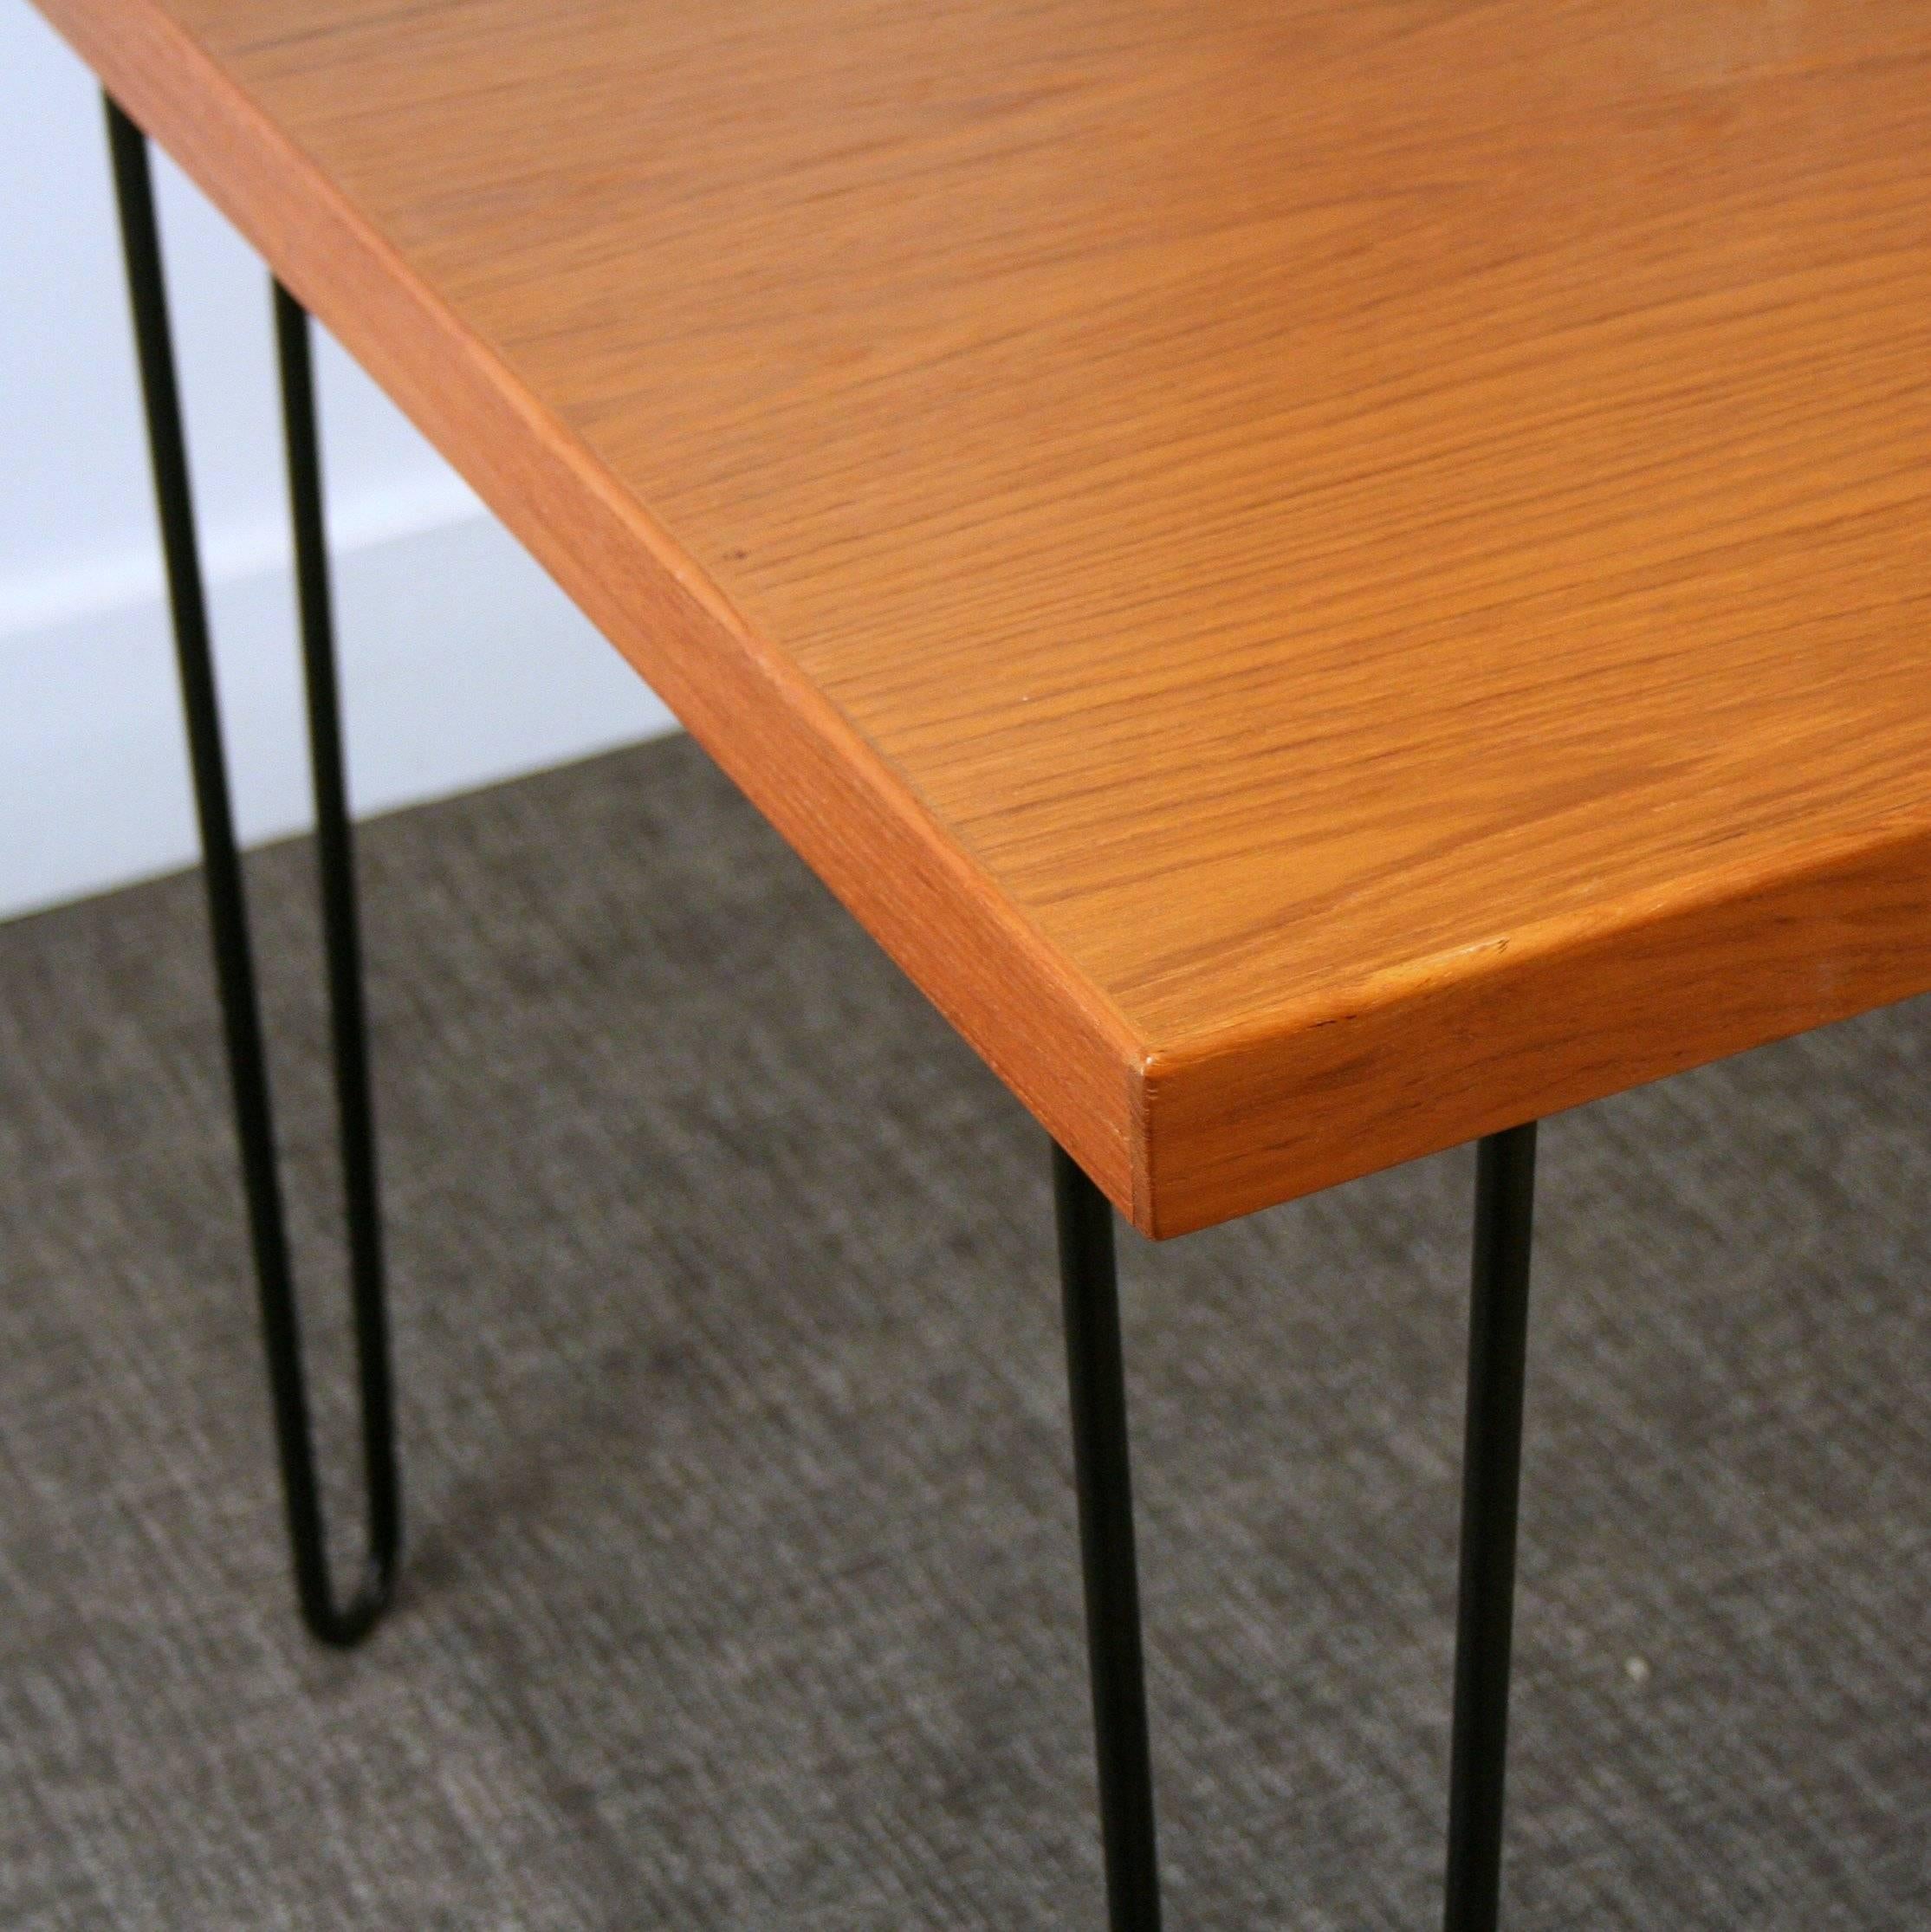 Teak Black Hairpin Legs Dining Table In Excellent Condition For Sale In Vancouver, BC